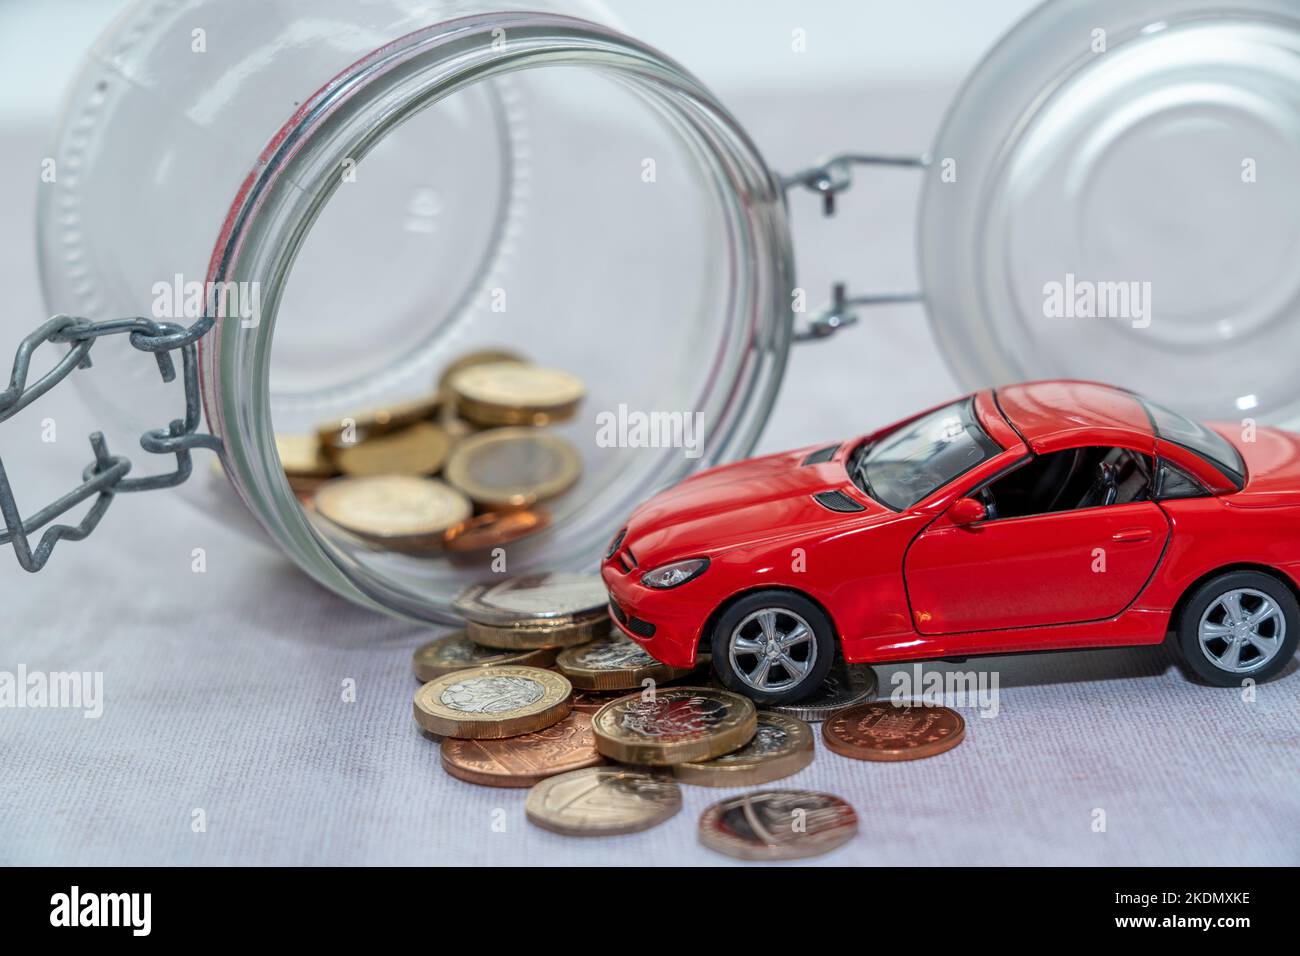 Car on coins; Car loan, Finance, saving money, insurance and leasing time concepts Stock Photo